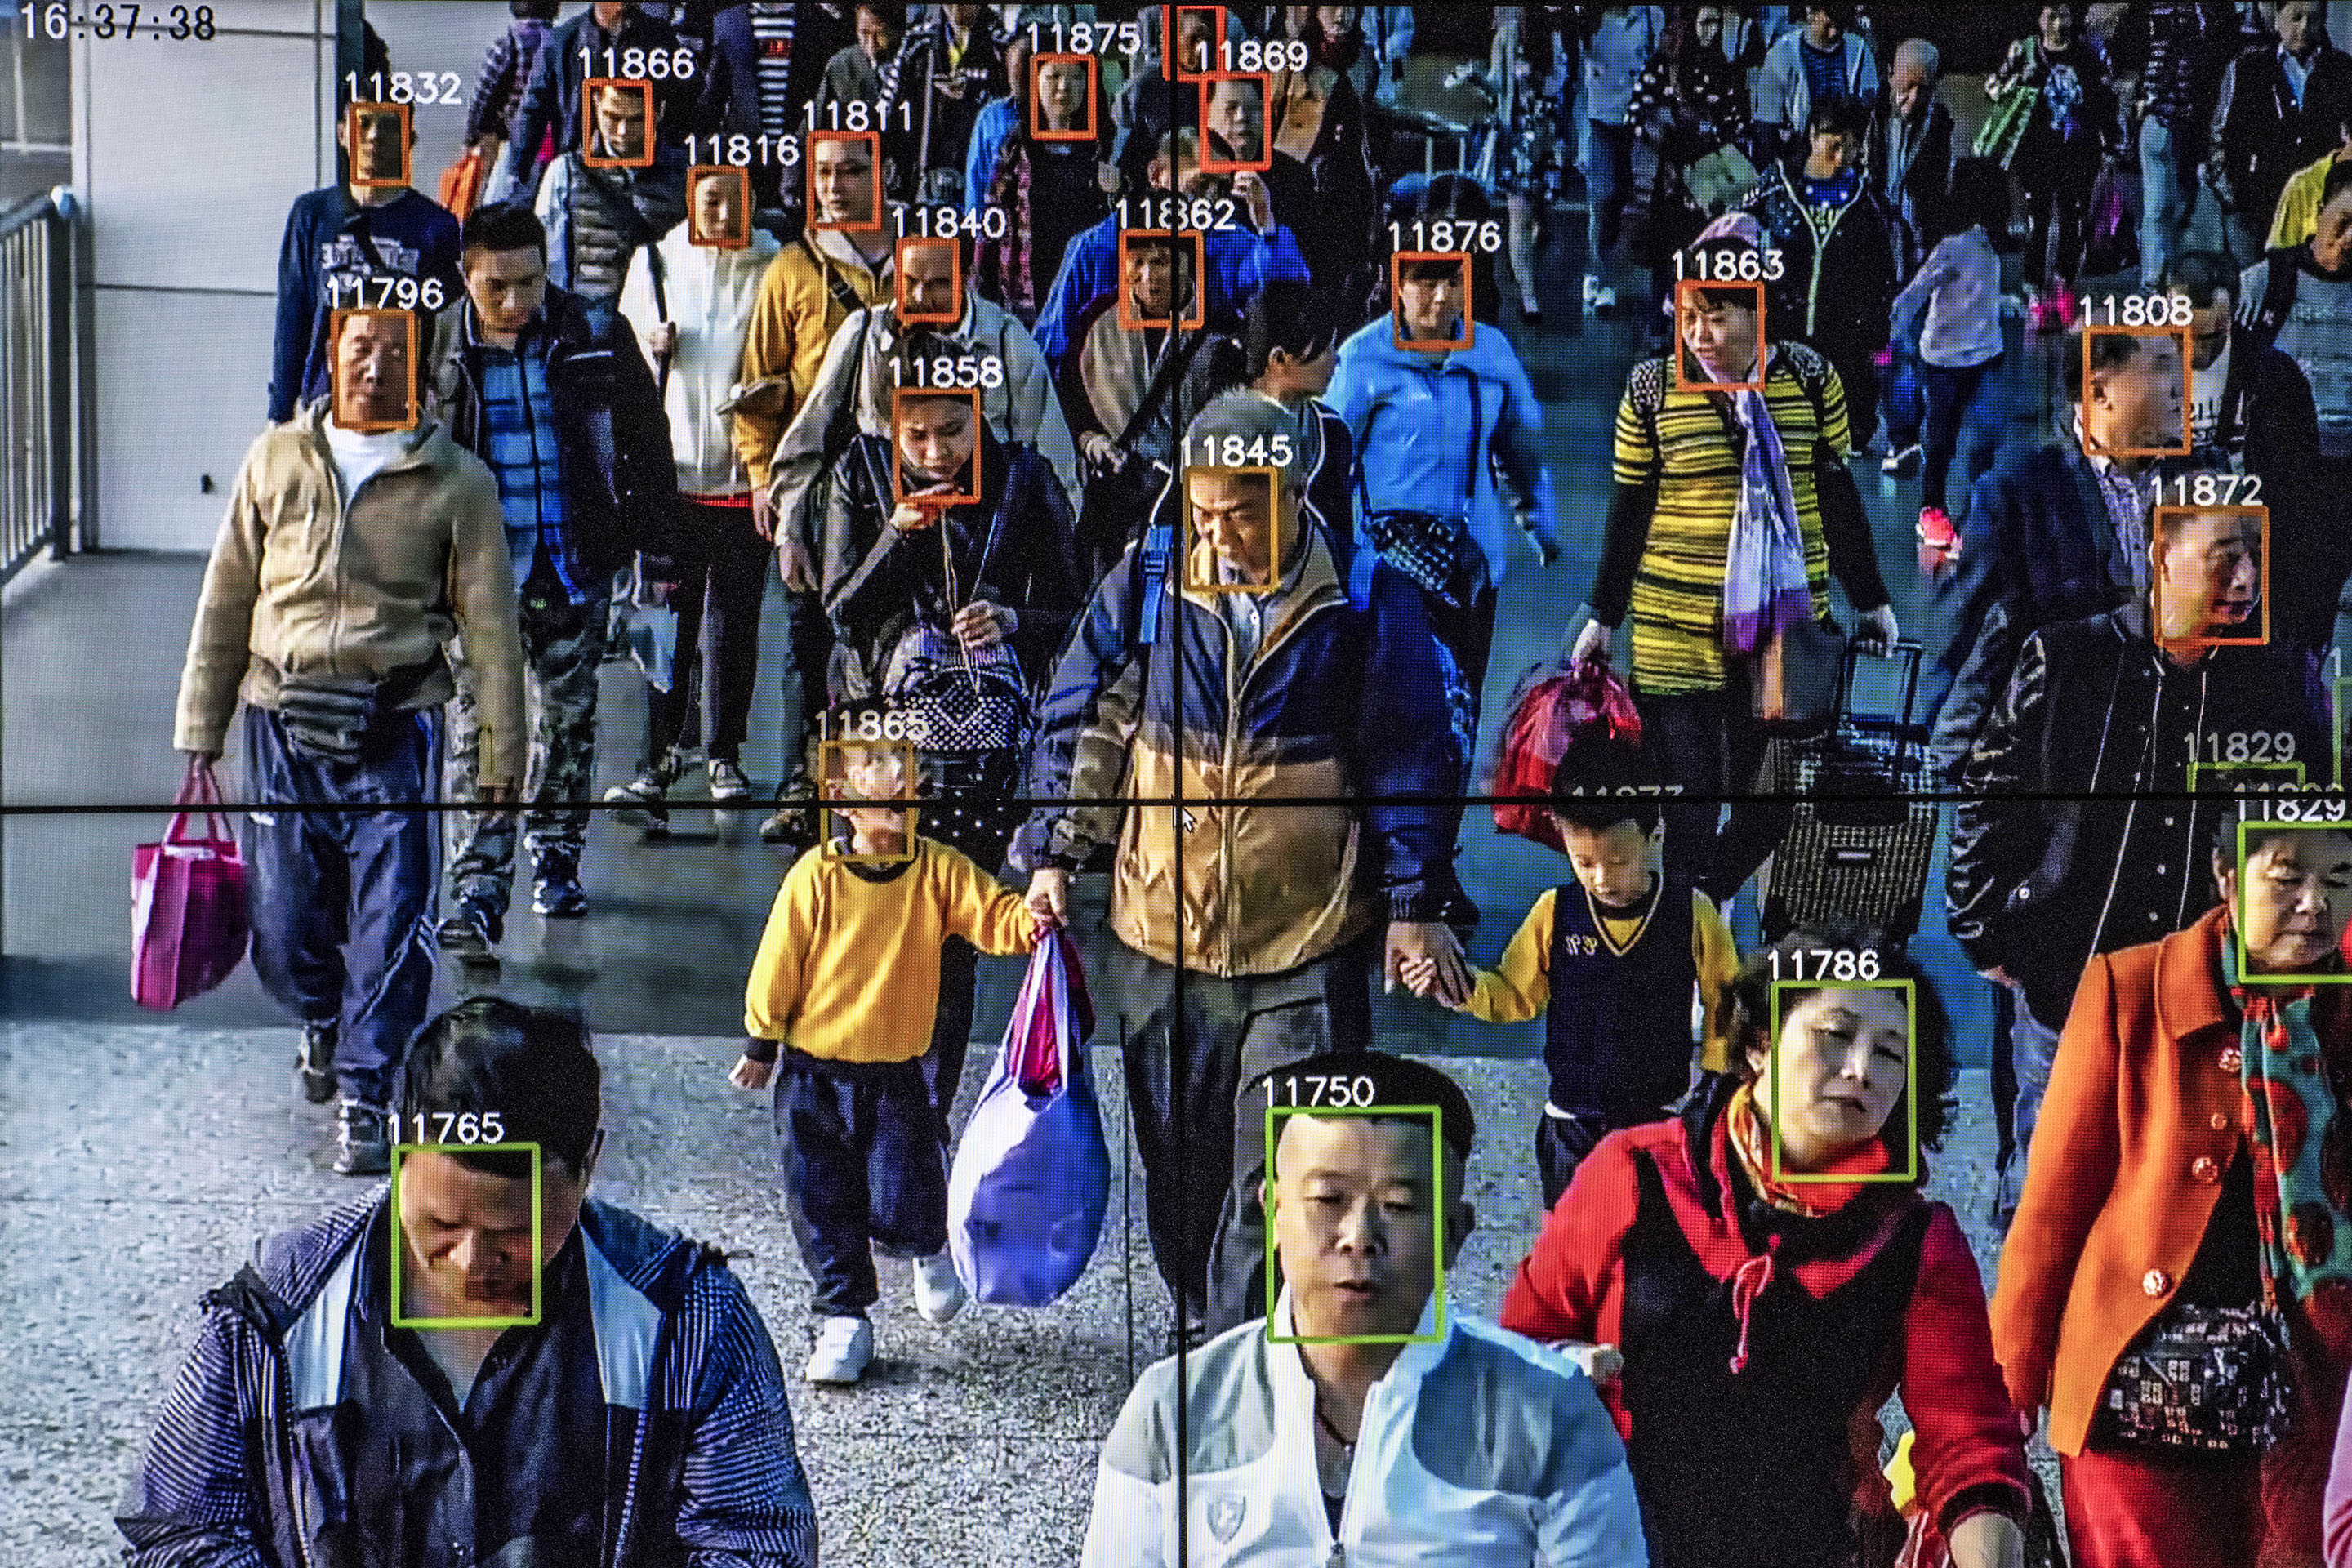 Monitors display a video showing facial recognition software in use at the headquarters of the artificial intelligence company Megvii, in Beijing.